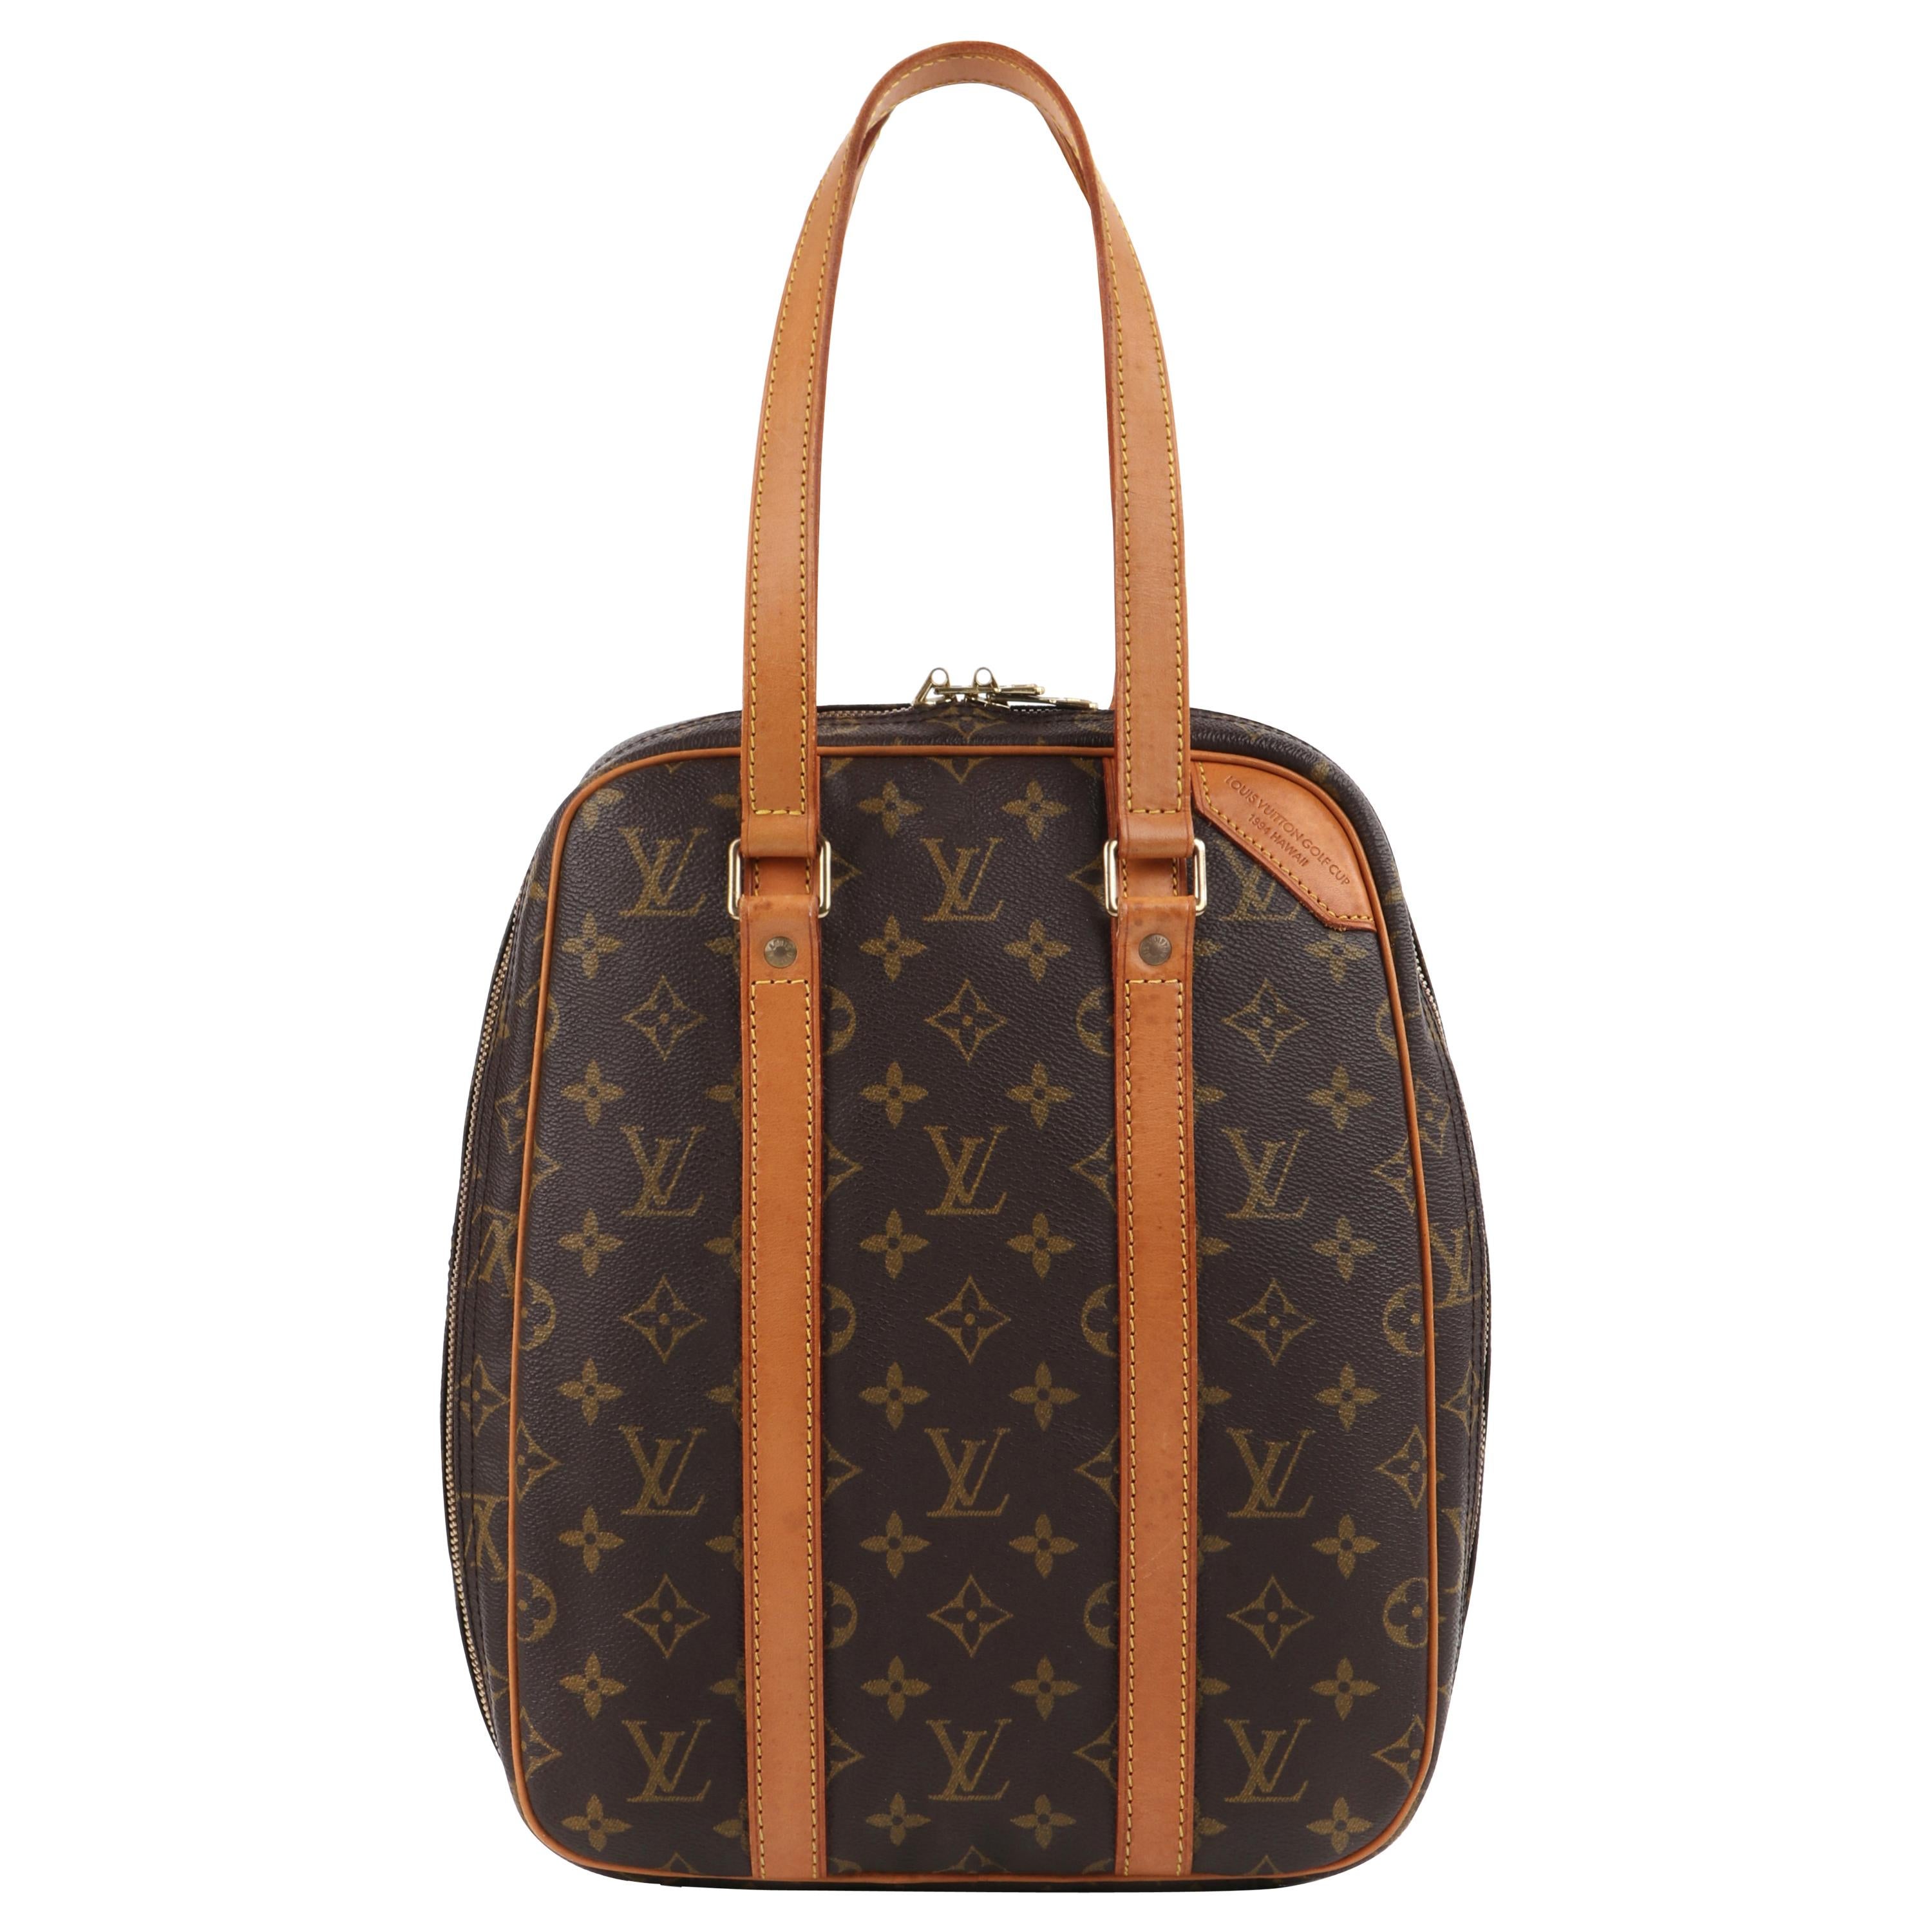 A LOUIS VUITTON MONOGRAMMED HANDBAG, the two front pockets with LV  hardware, buckle fastener, adjust